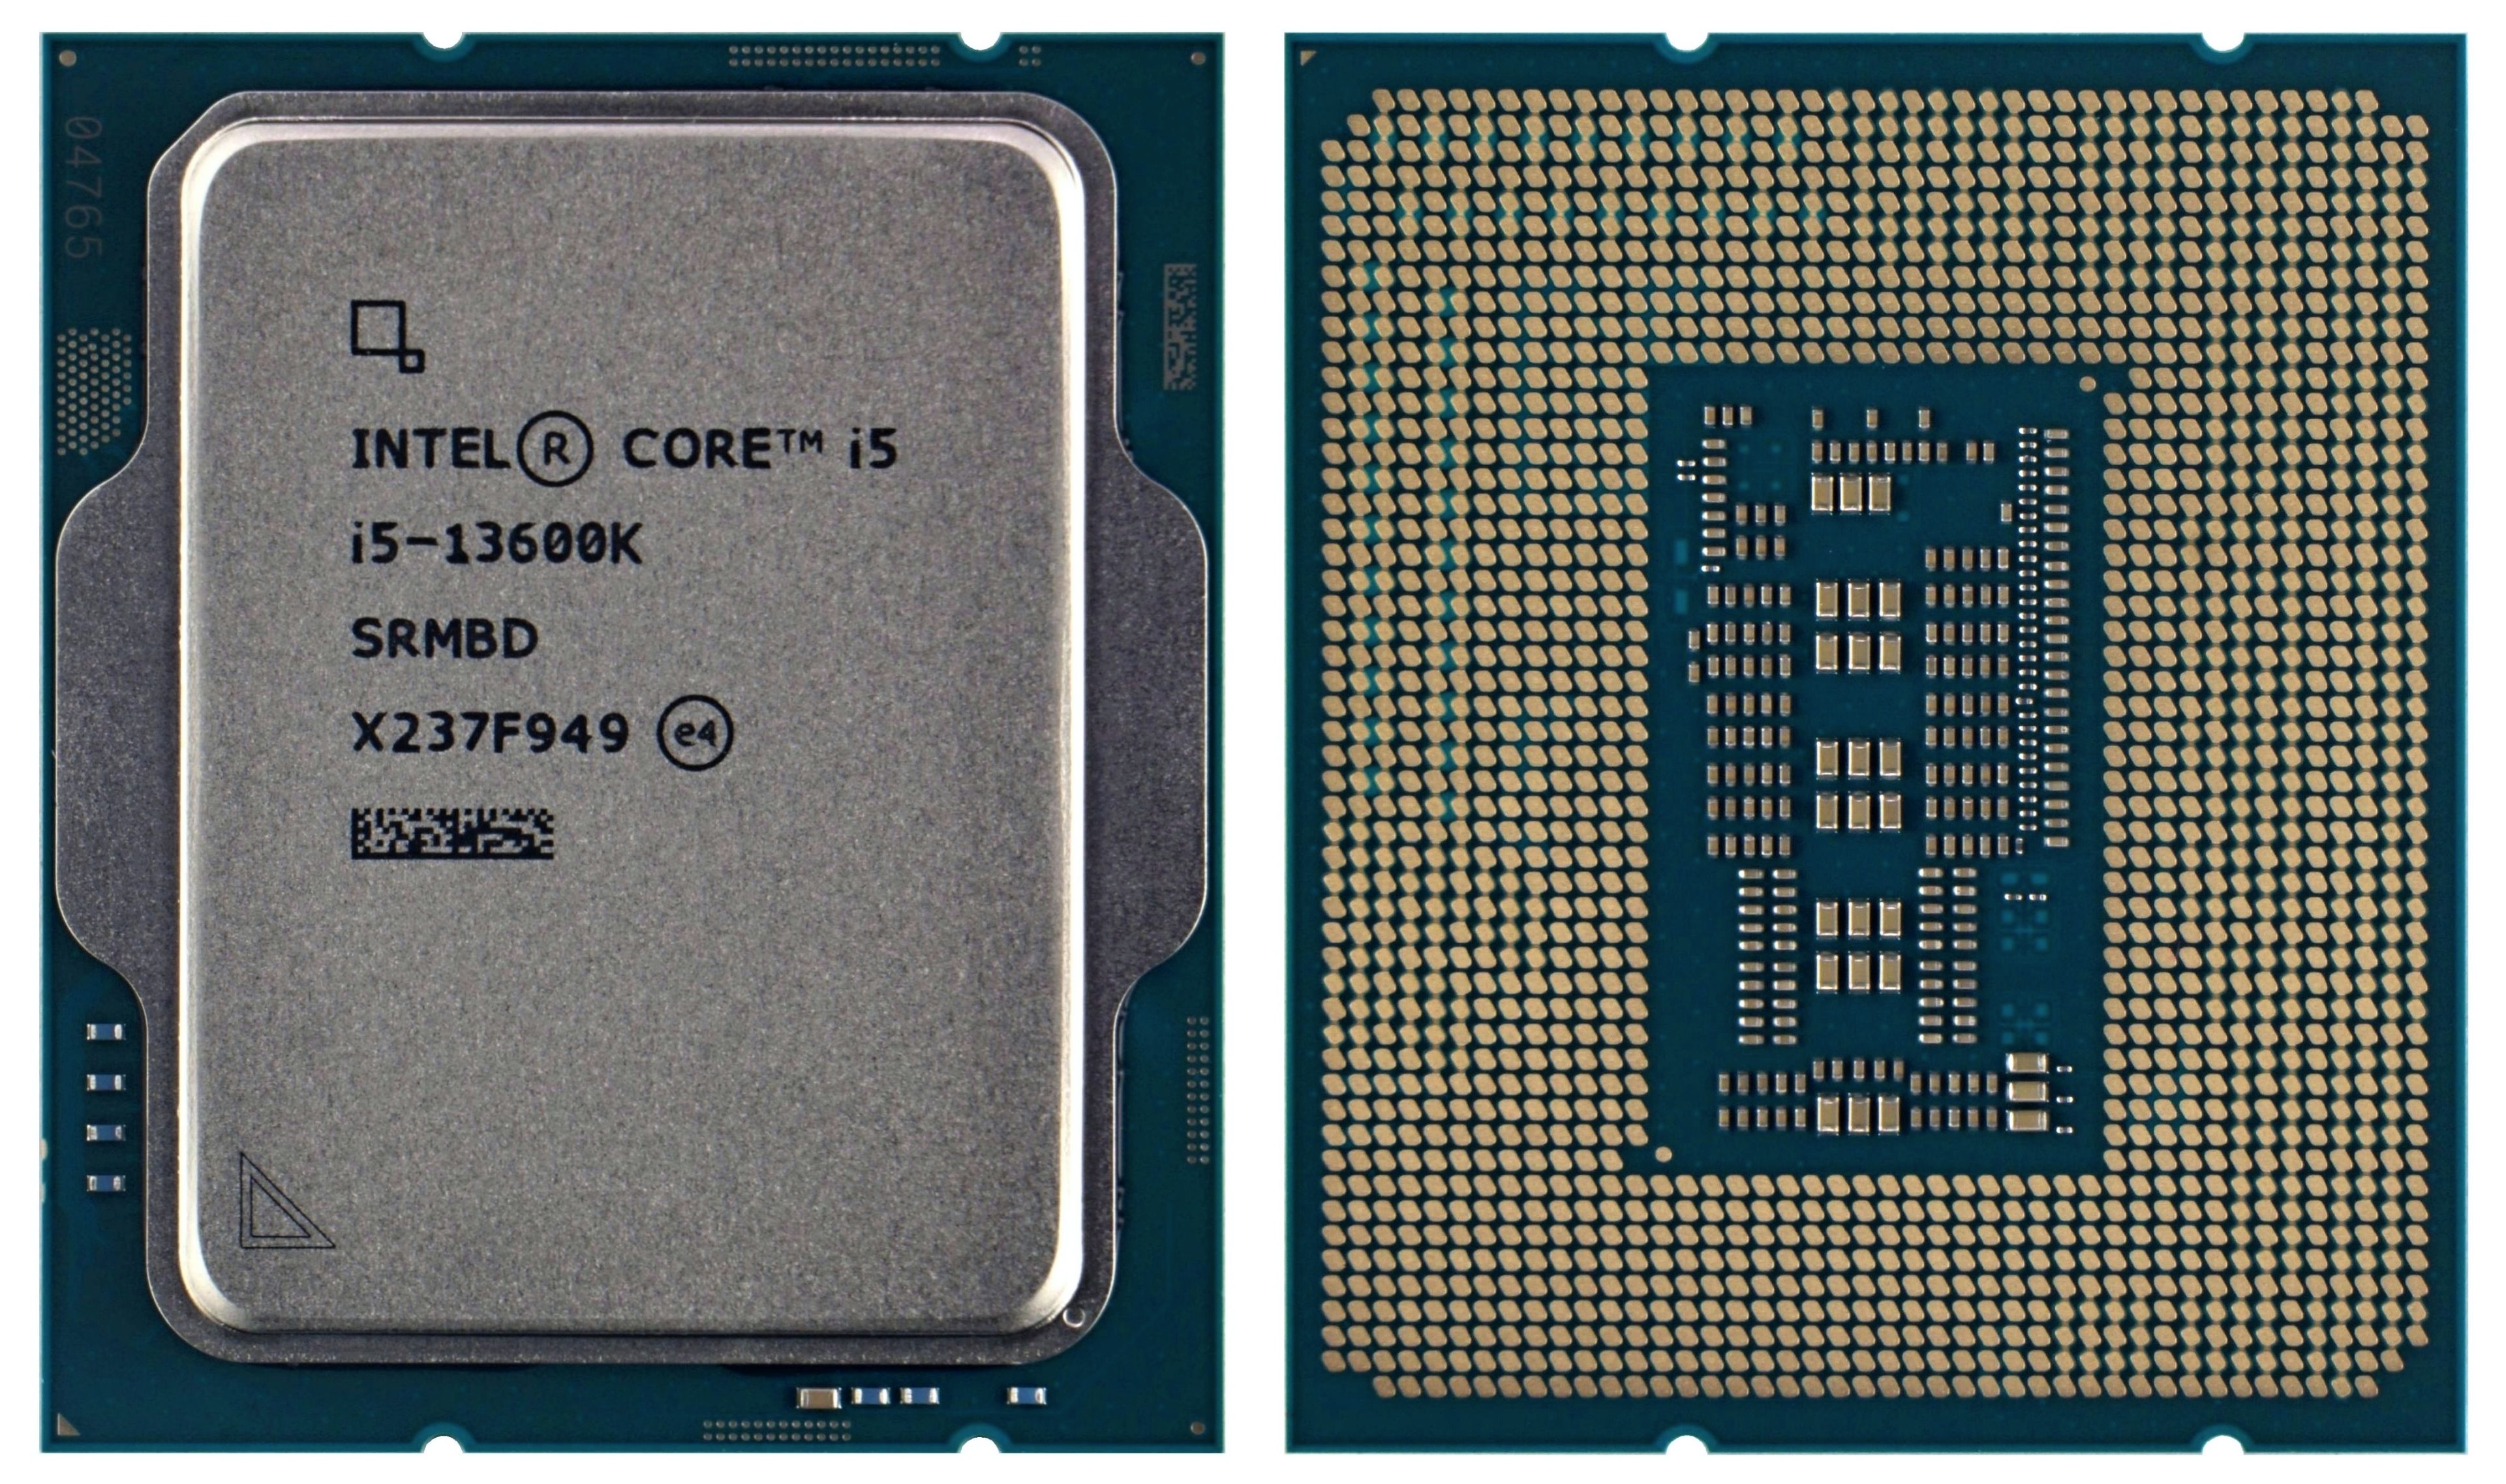 Why the Intel Core i5-13600K is my favorite CPU right now